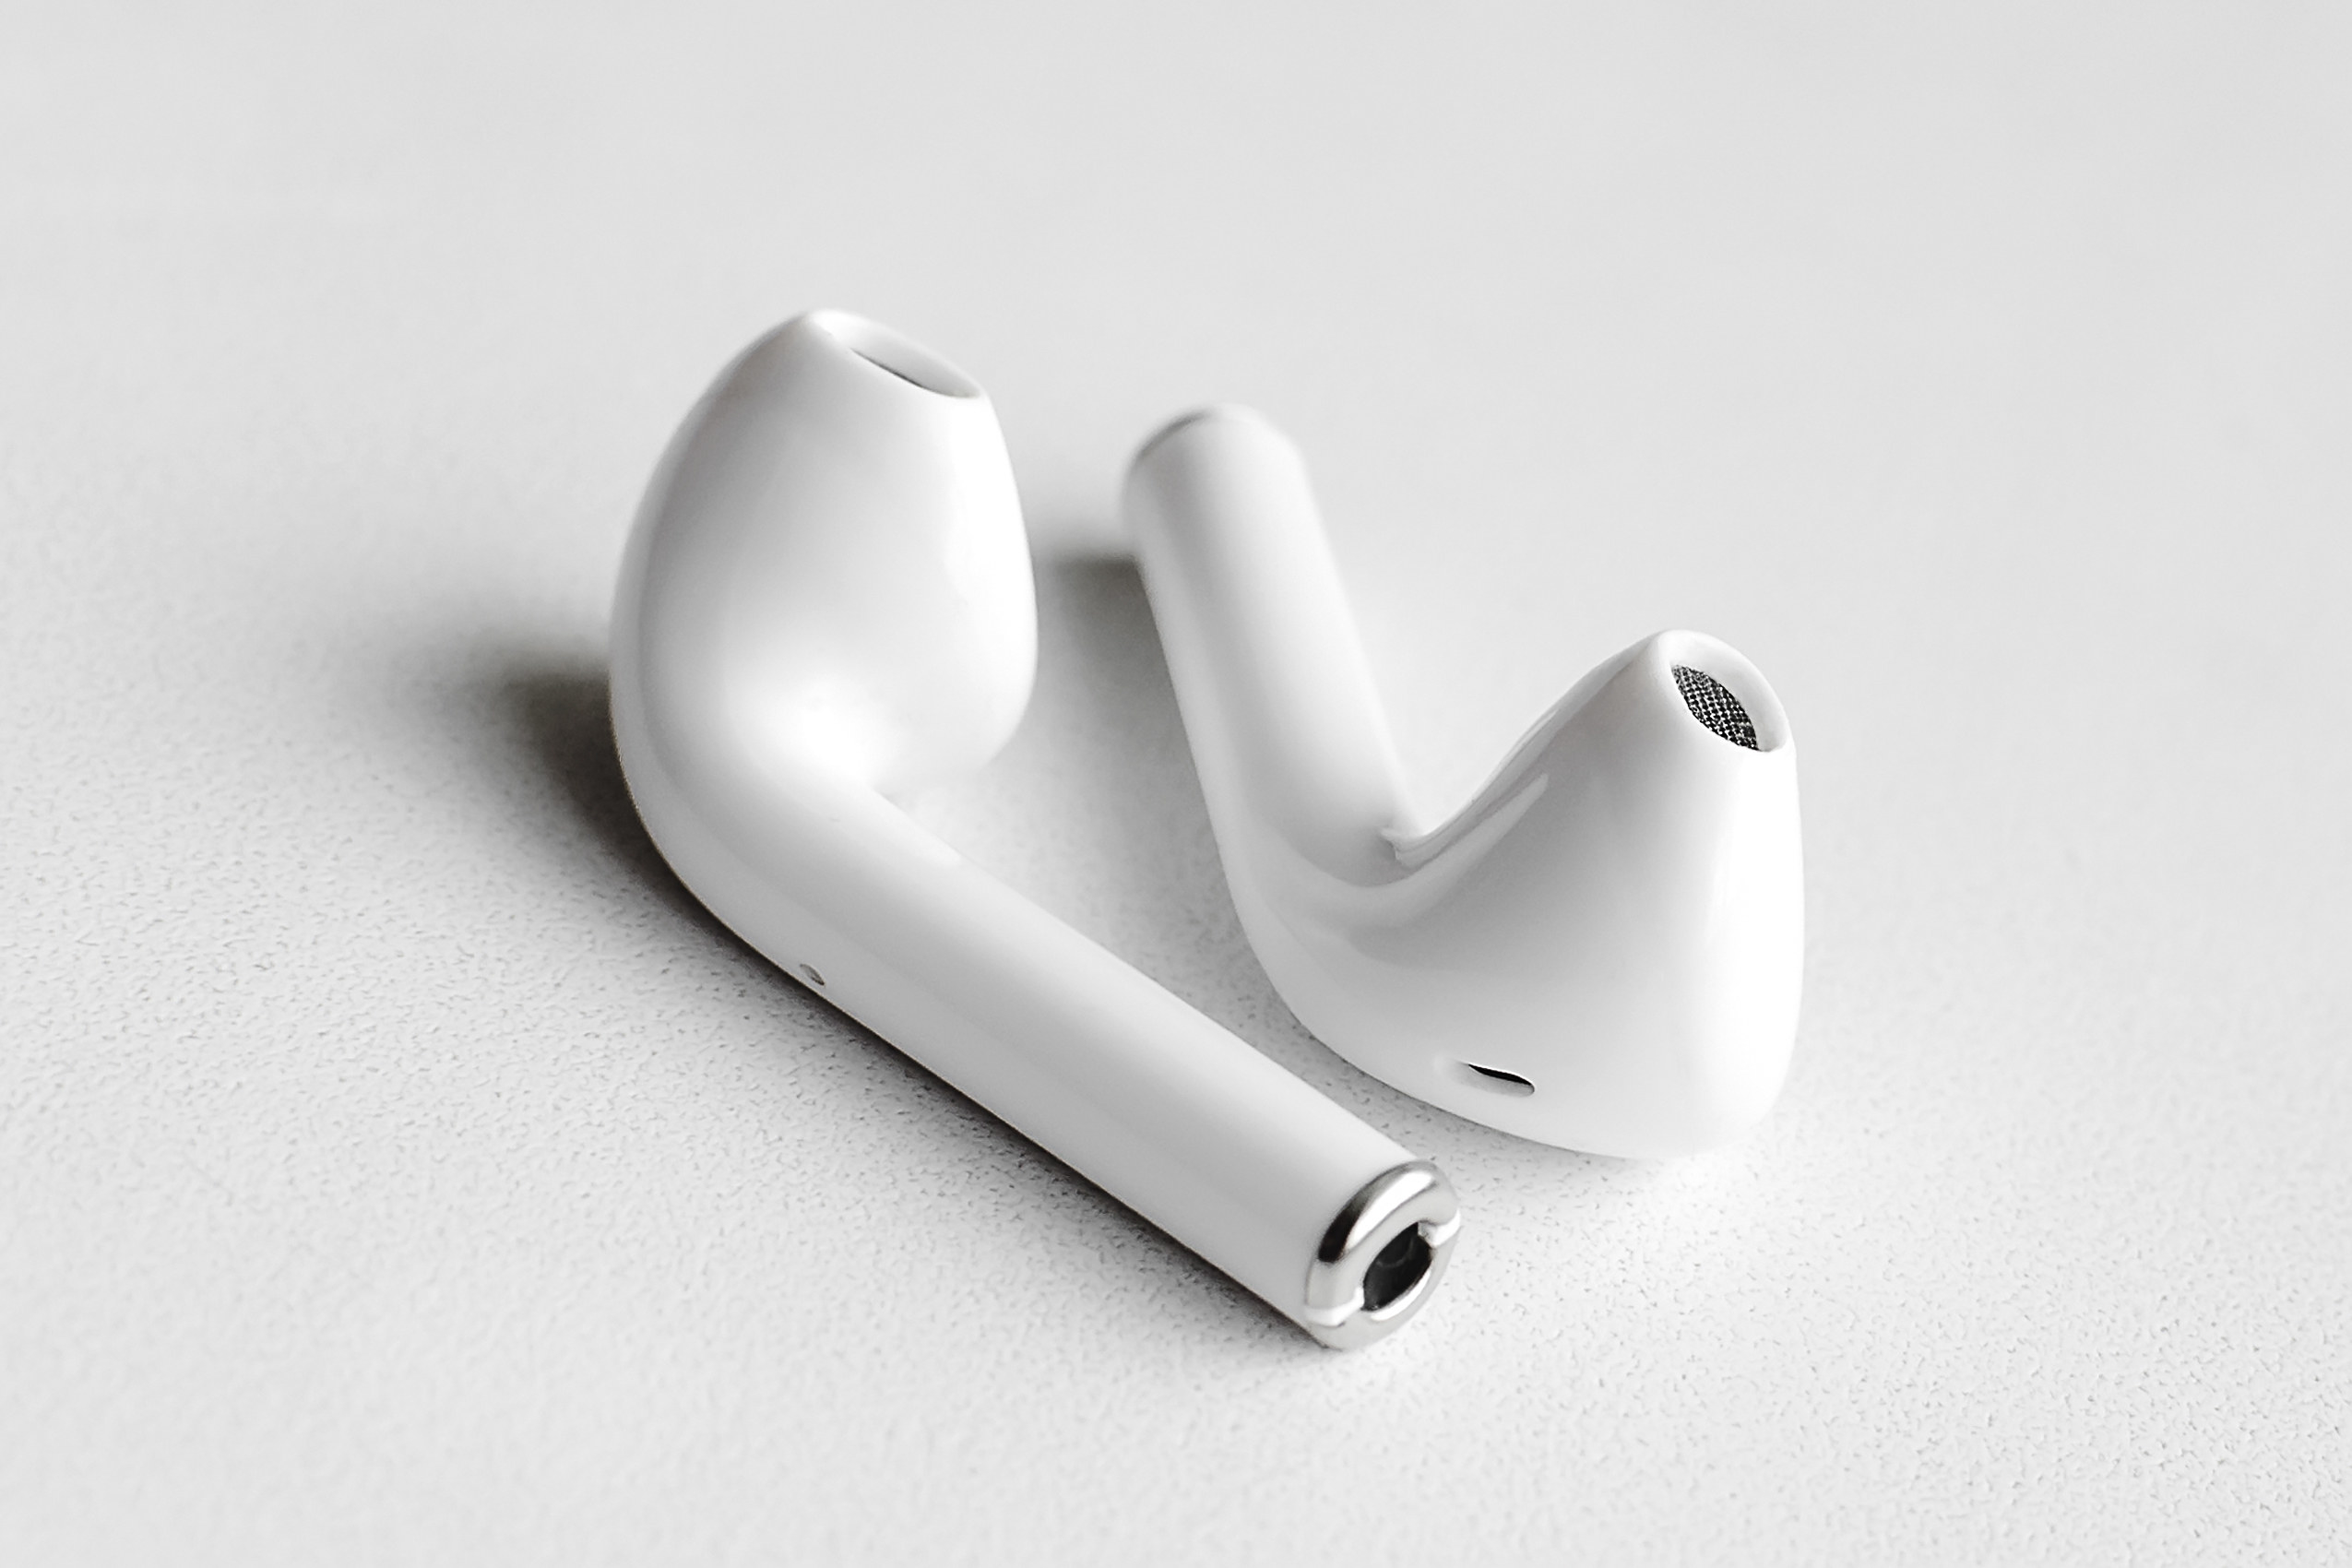 A pair of airpods